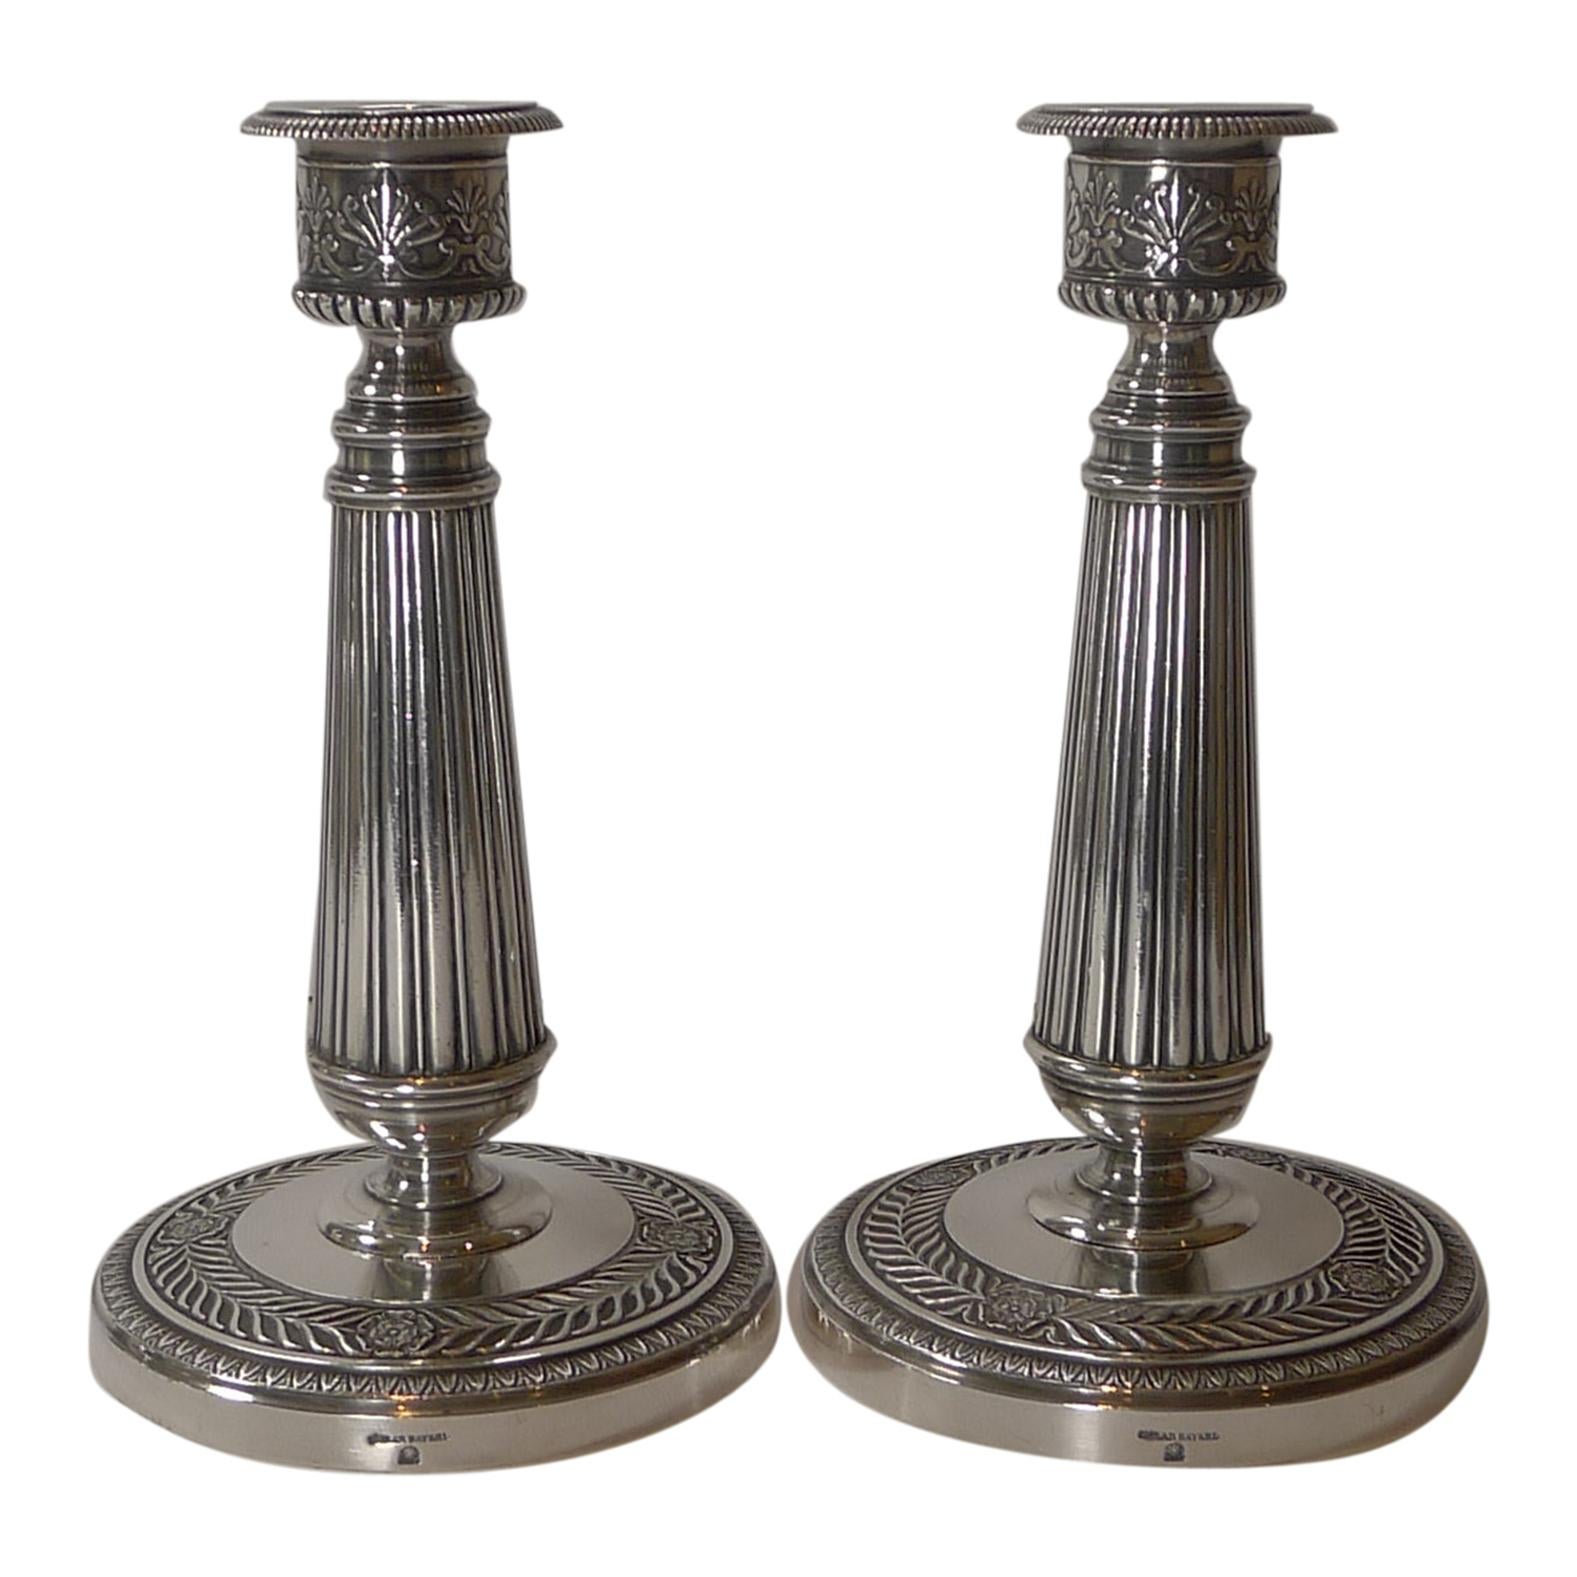 Top Quality Pair French Silver Plated Candlesticks by Cailar Bayard, c.1900